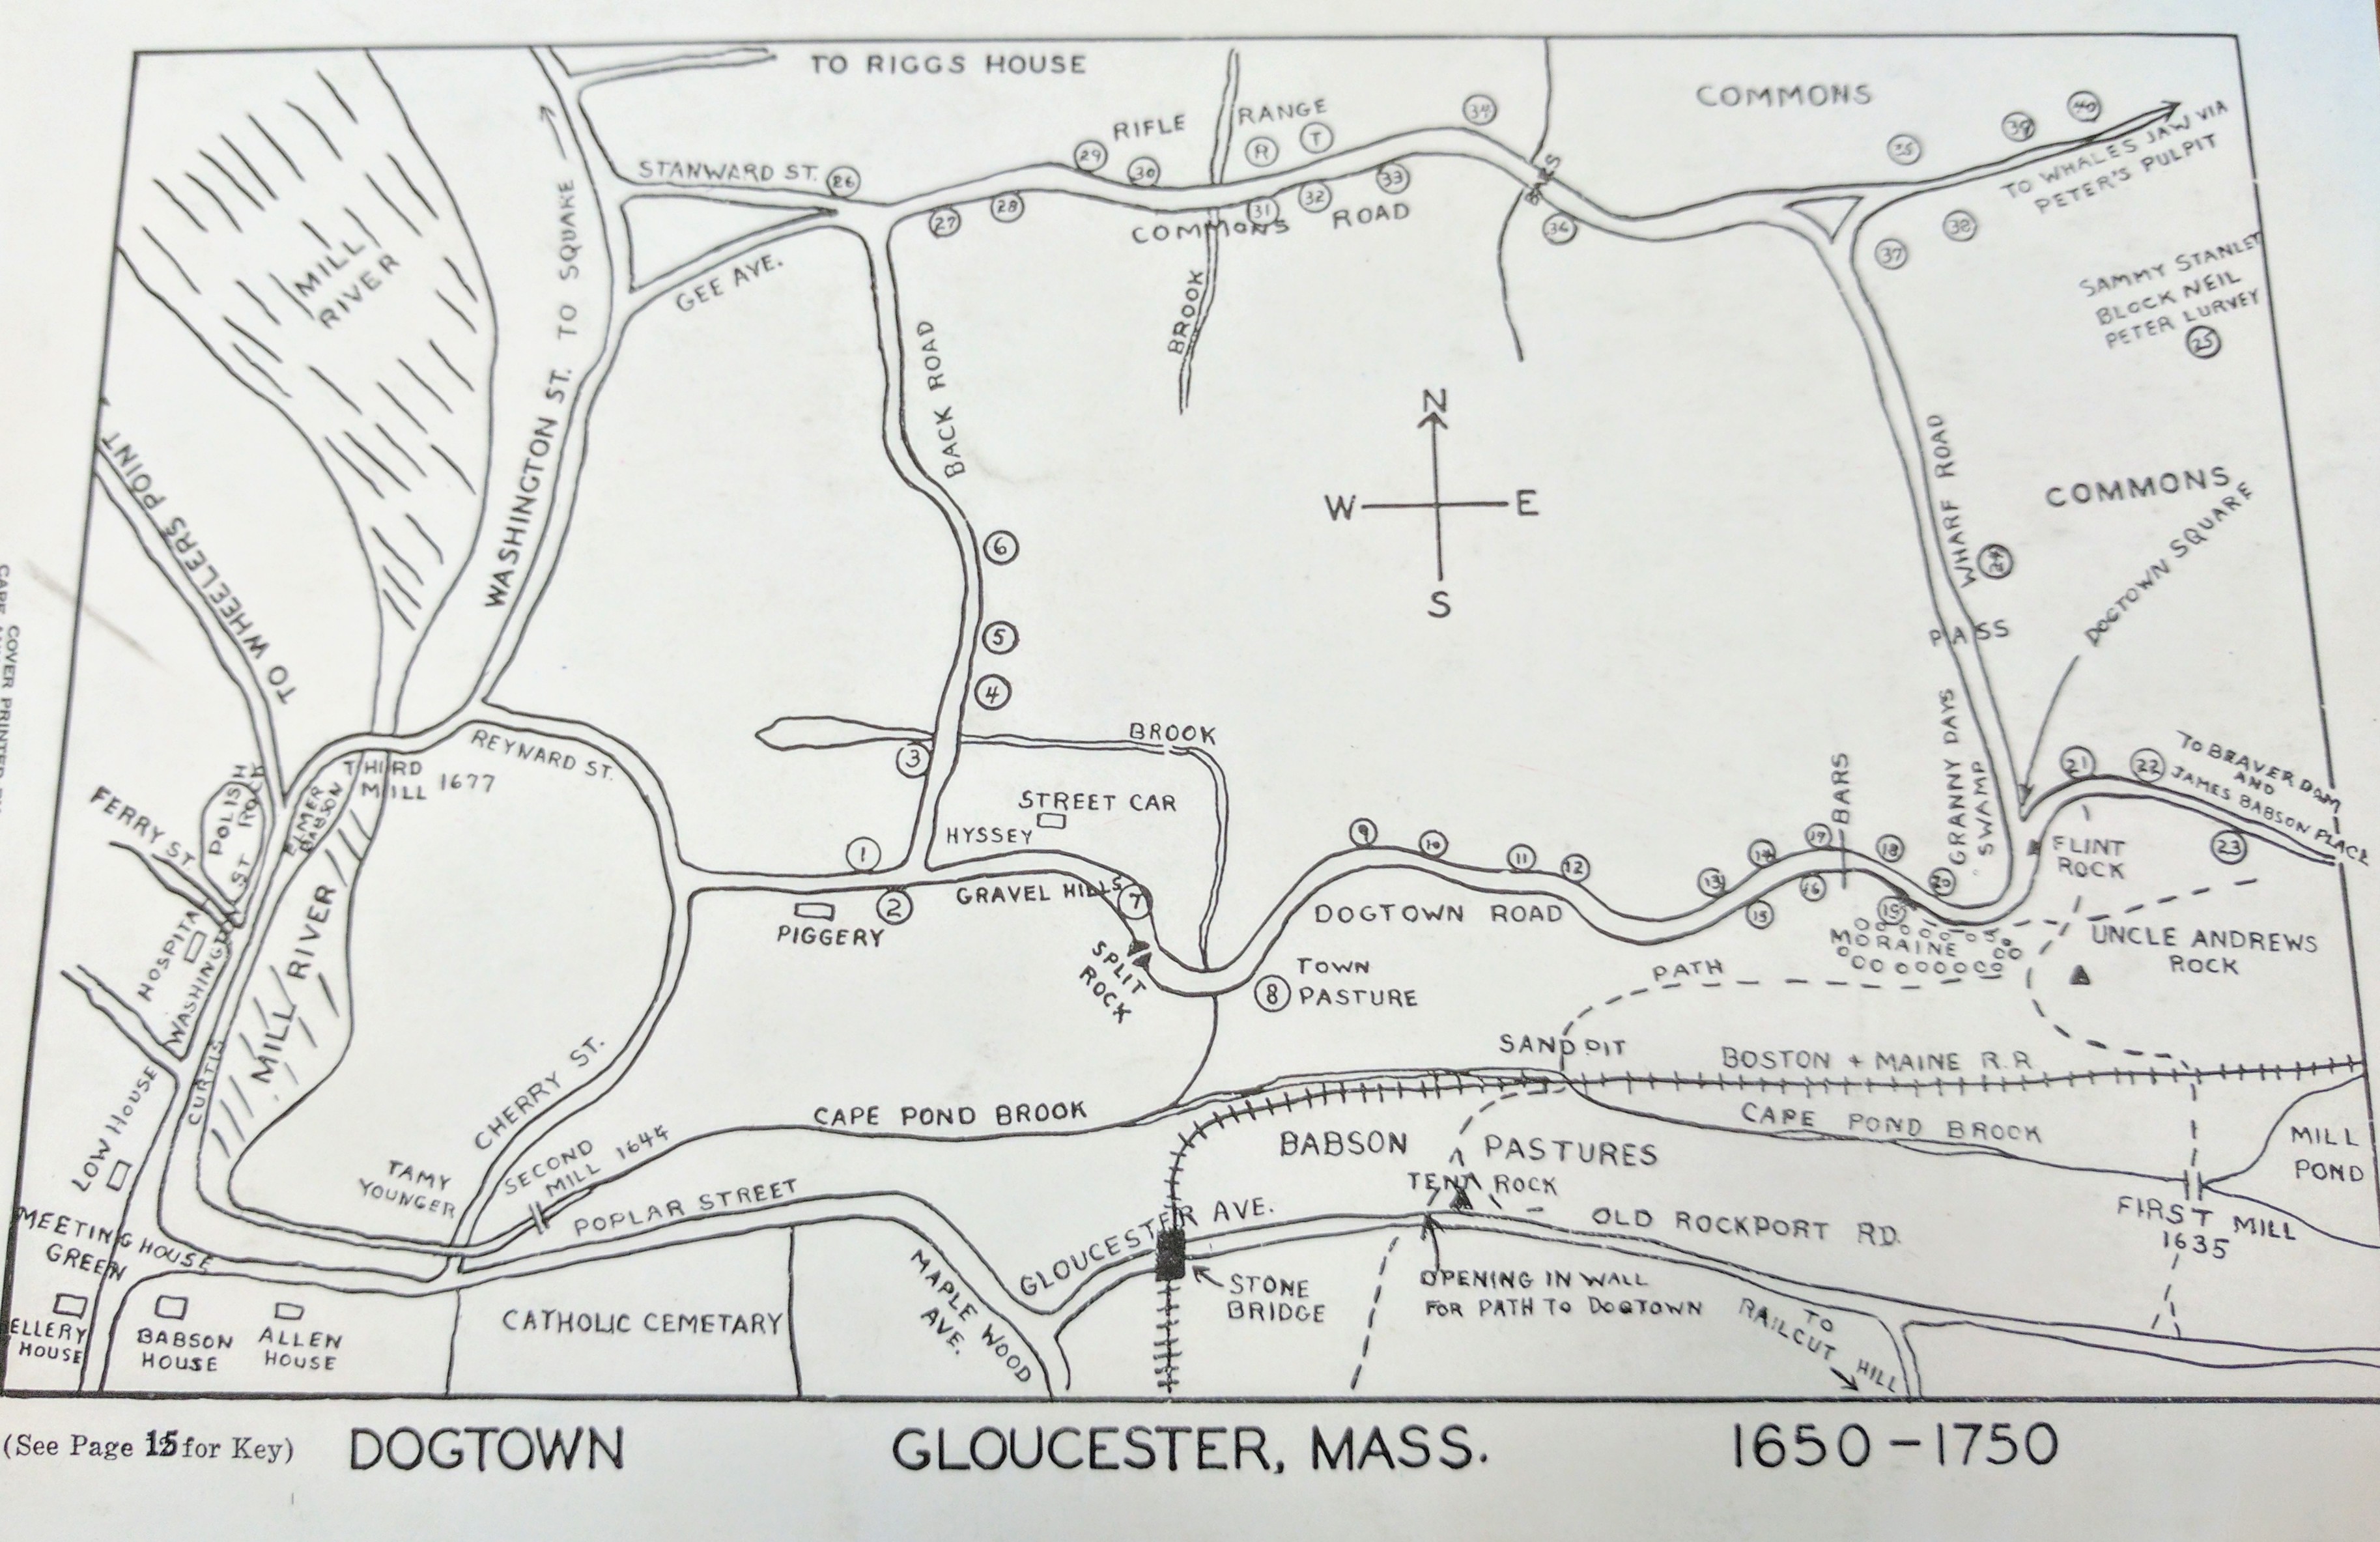 Gloucester 3rd annual 1954 Cape Ann Festival of the Arts - Dogtown map for back cover